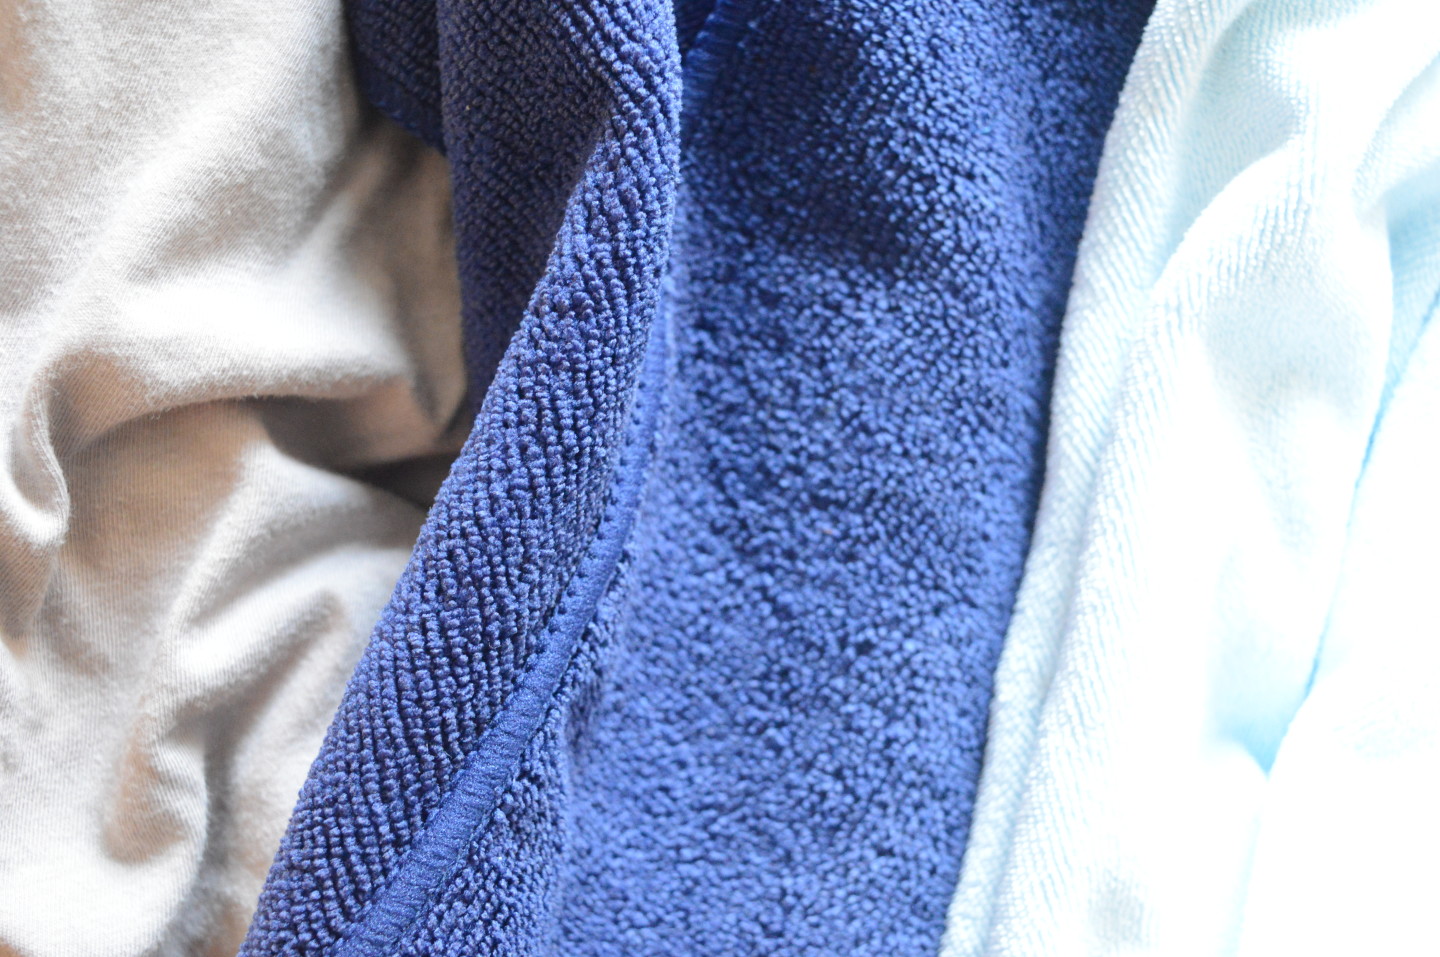 Regular Towels, Microfiber Towels or T-shirts: Which is best for